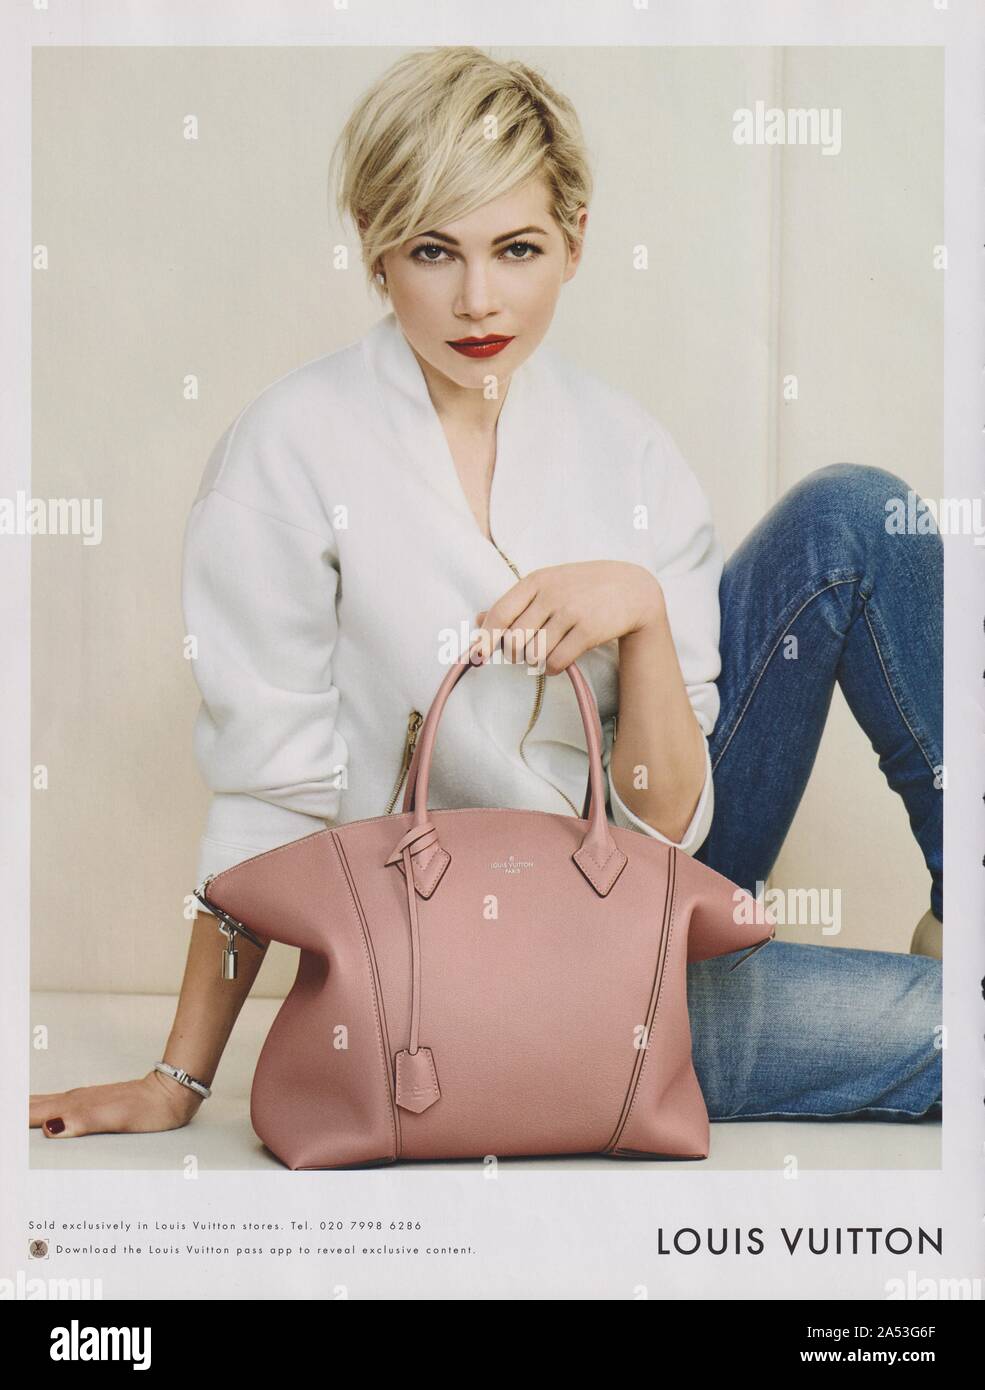 poster advertising Louis Vuitton handbag with Michelle Williams